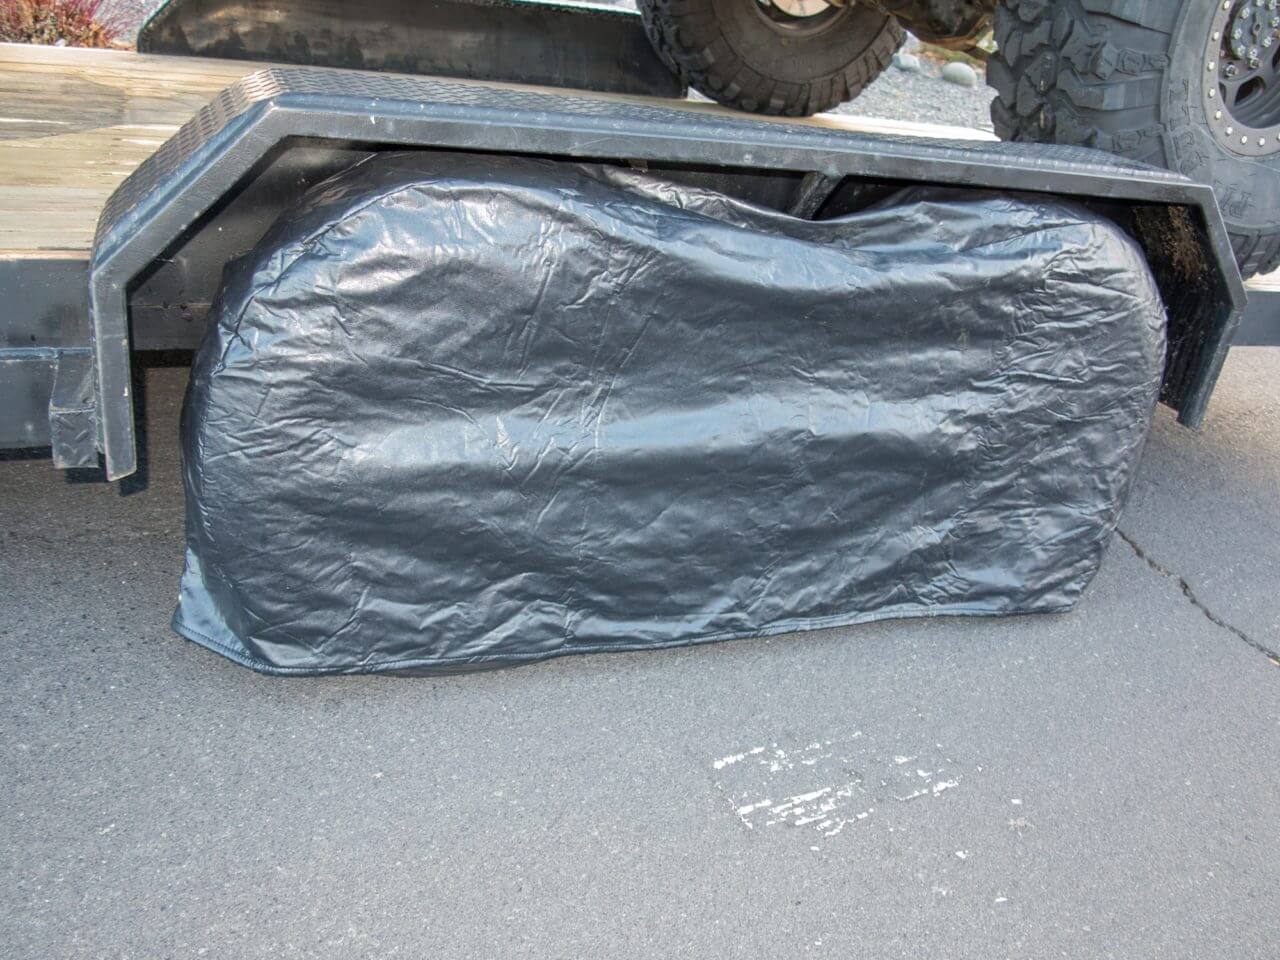 09 trailer tire covers